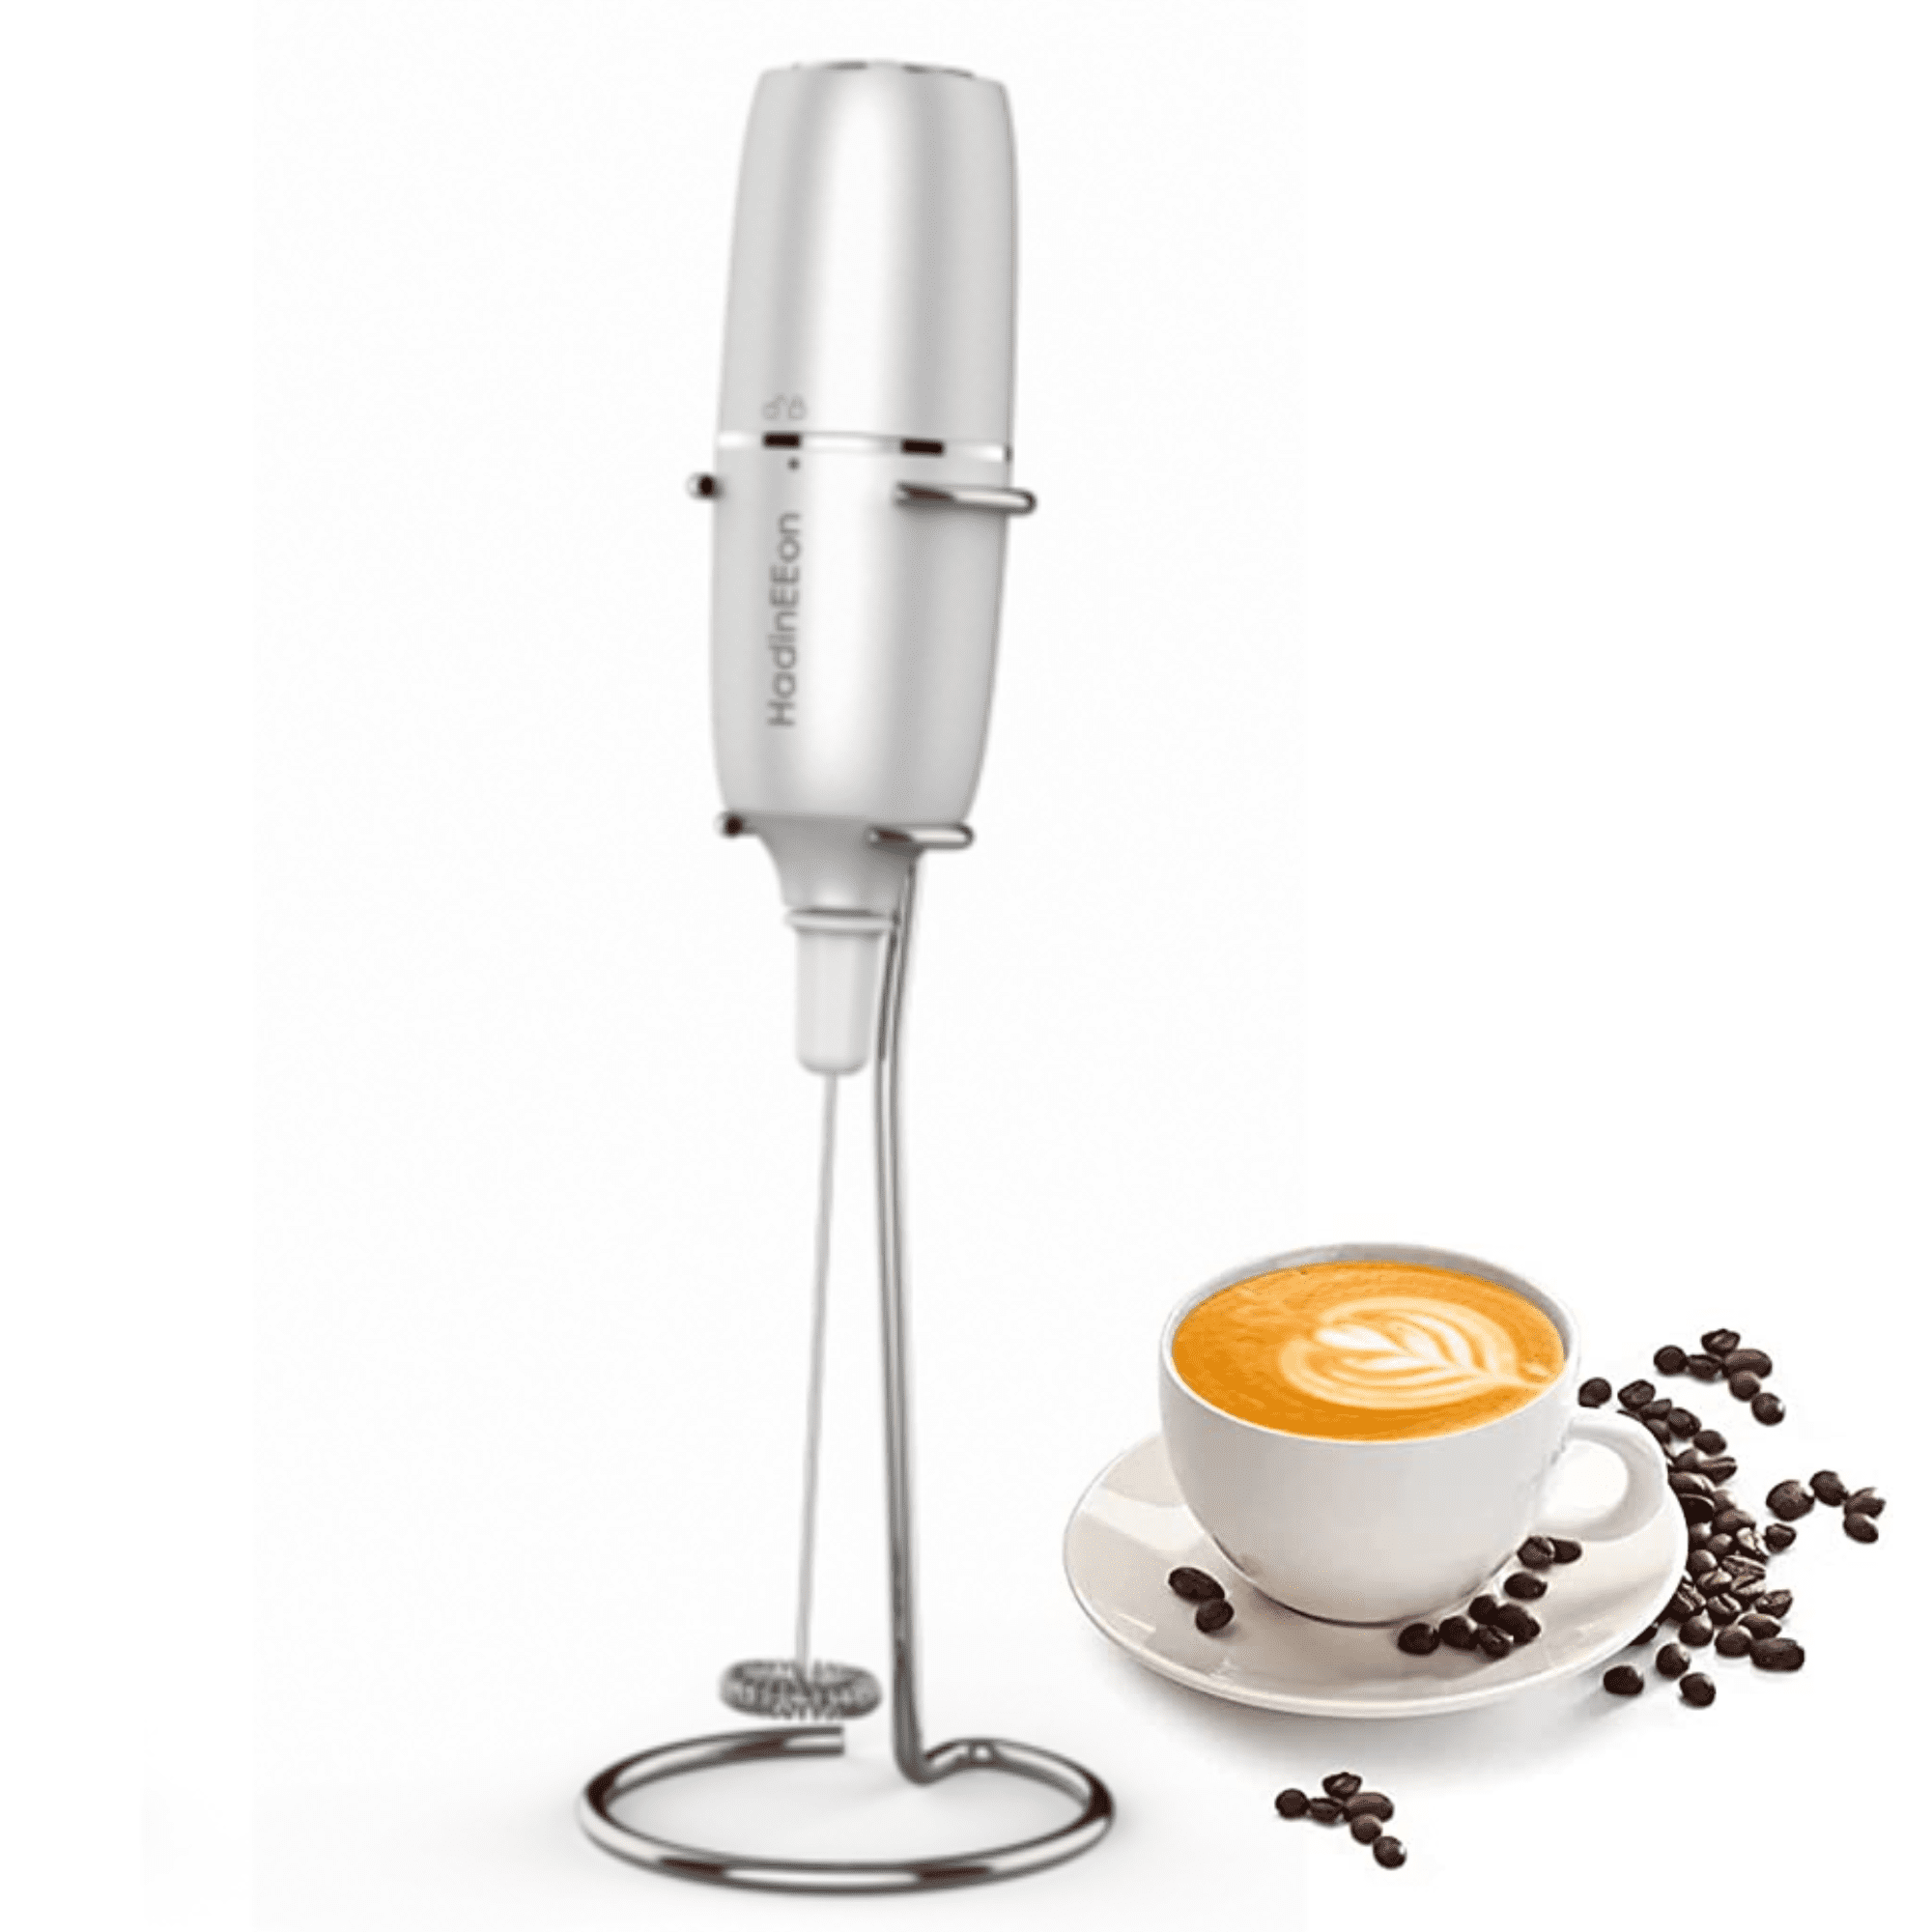 Chamberlain Coffee White Milk Frother - Handheld Frother for Coffee,  Matcha, Hot Chocolate and Drink Mixer - Electric Foam Maker - White